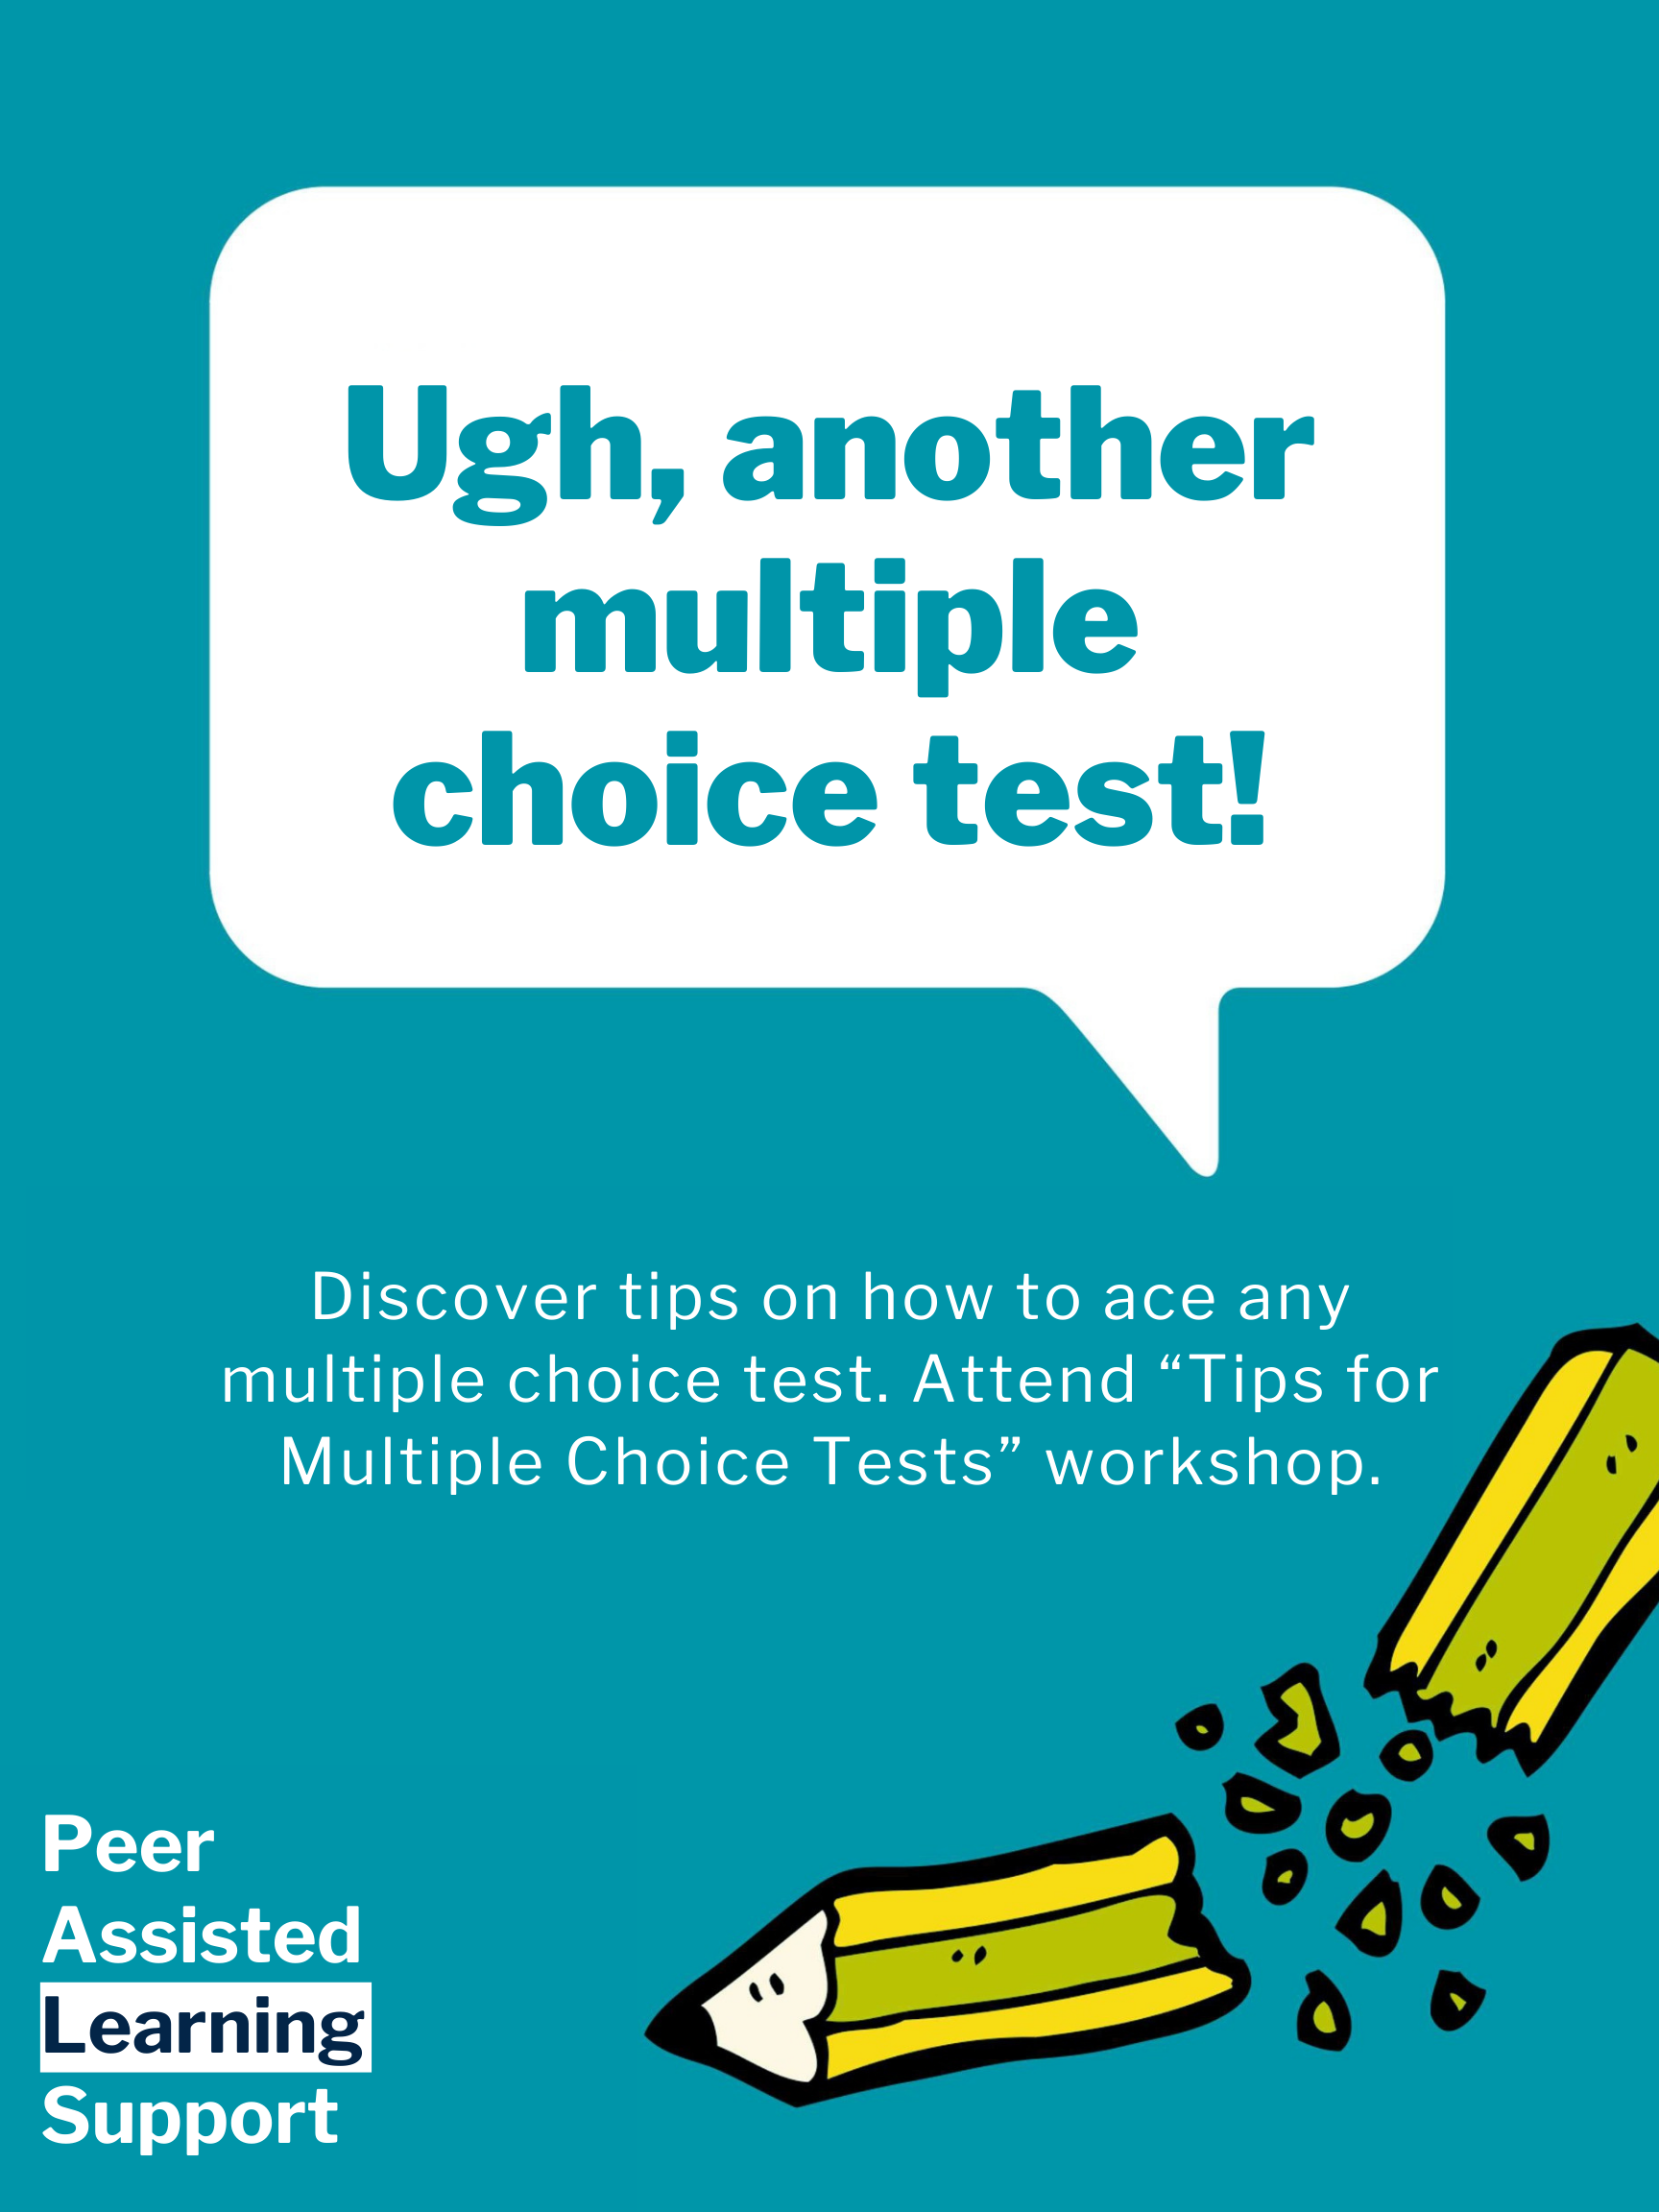 "Ugh, another multiple choice test!" in a speech bubble